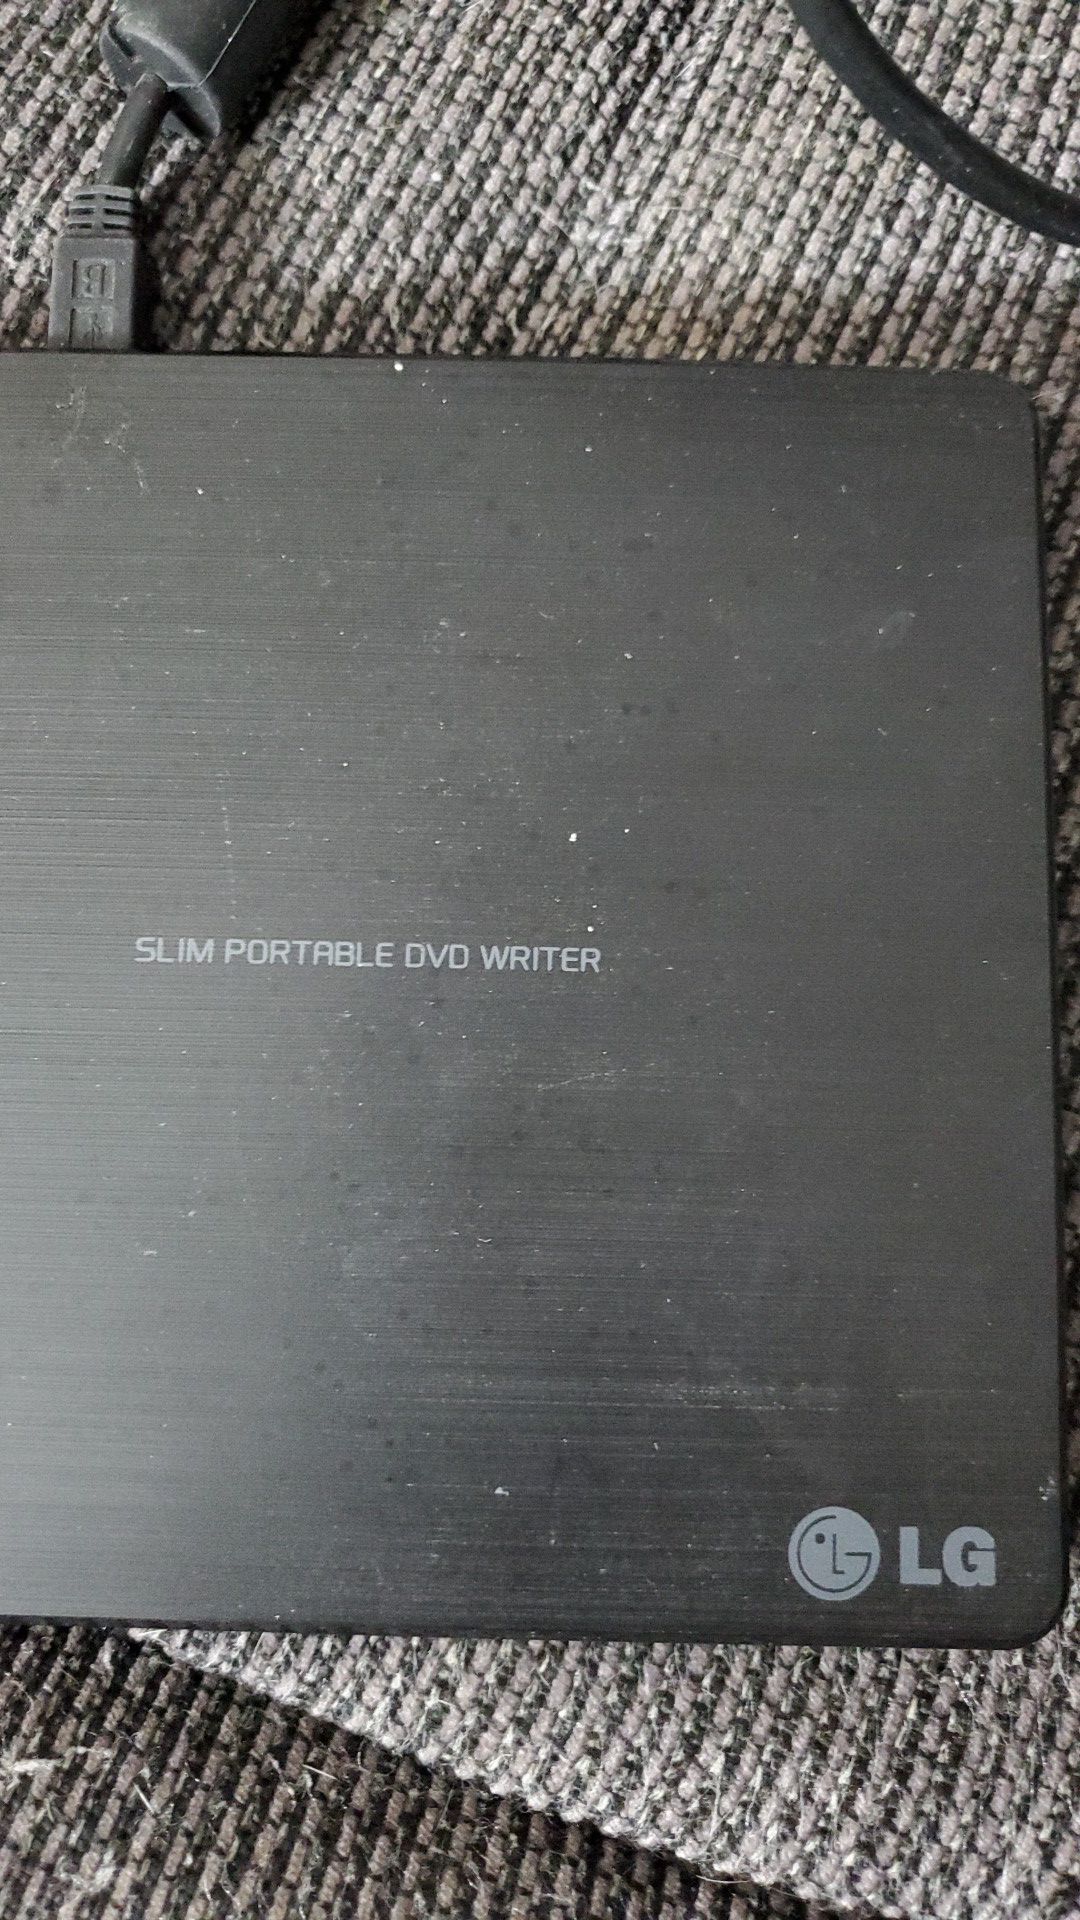 LG SLIM PORTABLE DVD WRITER / CAN CONNECT TO COMPUTER